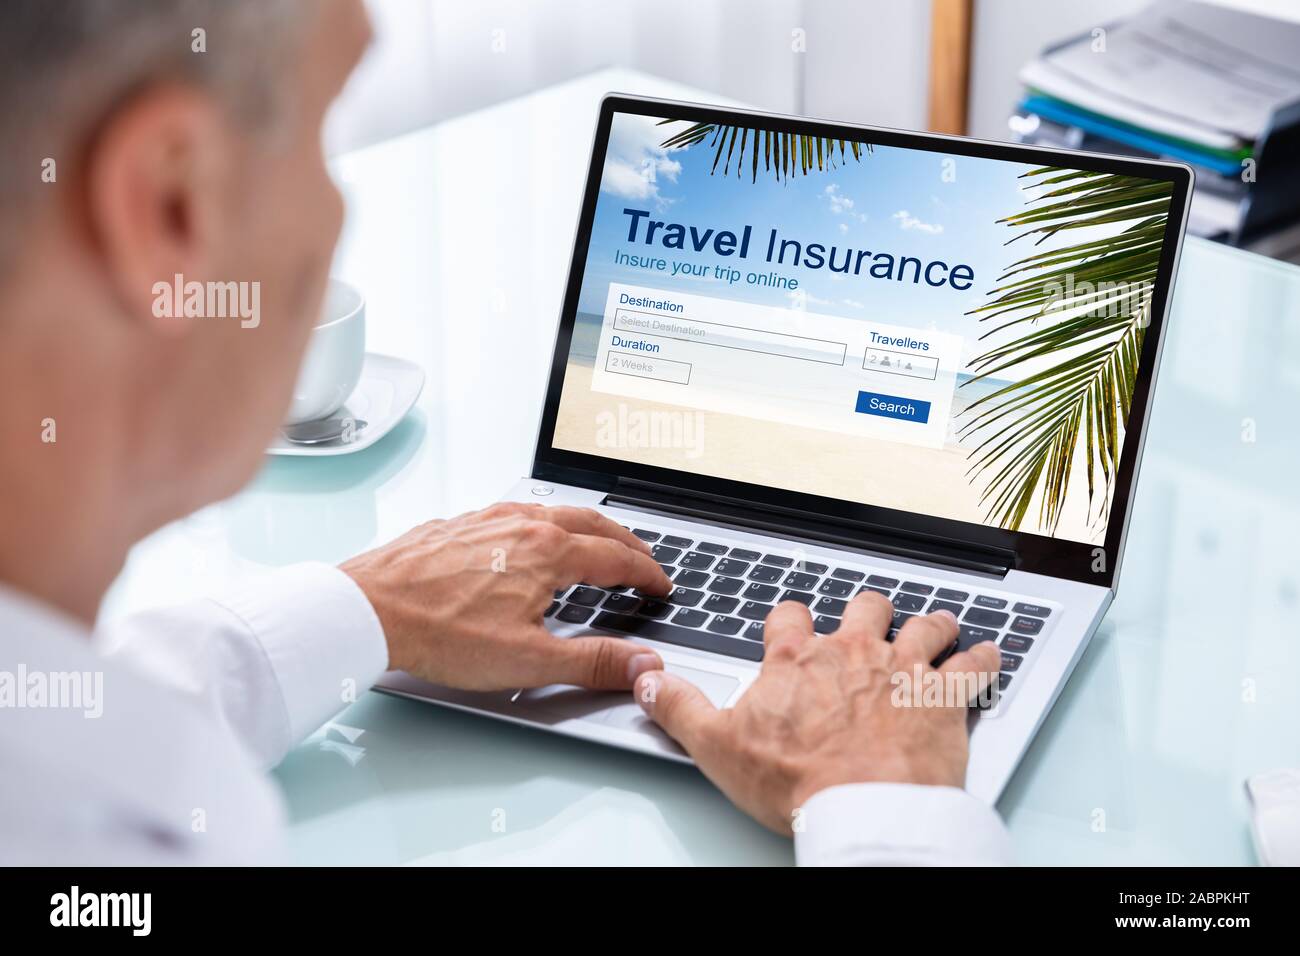 Man Sitting In Office Working On Laptop With Travel Insurance Application On Screen Stock Photo